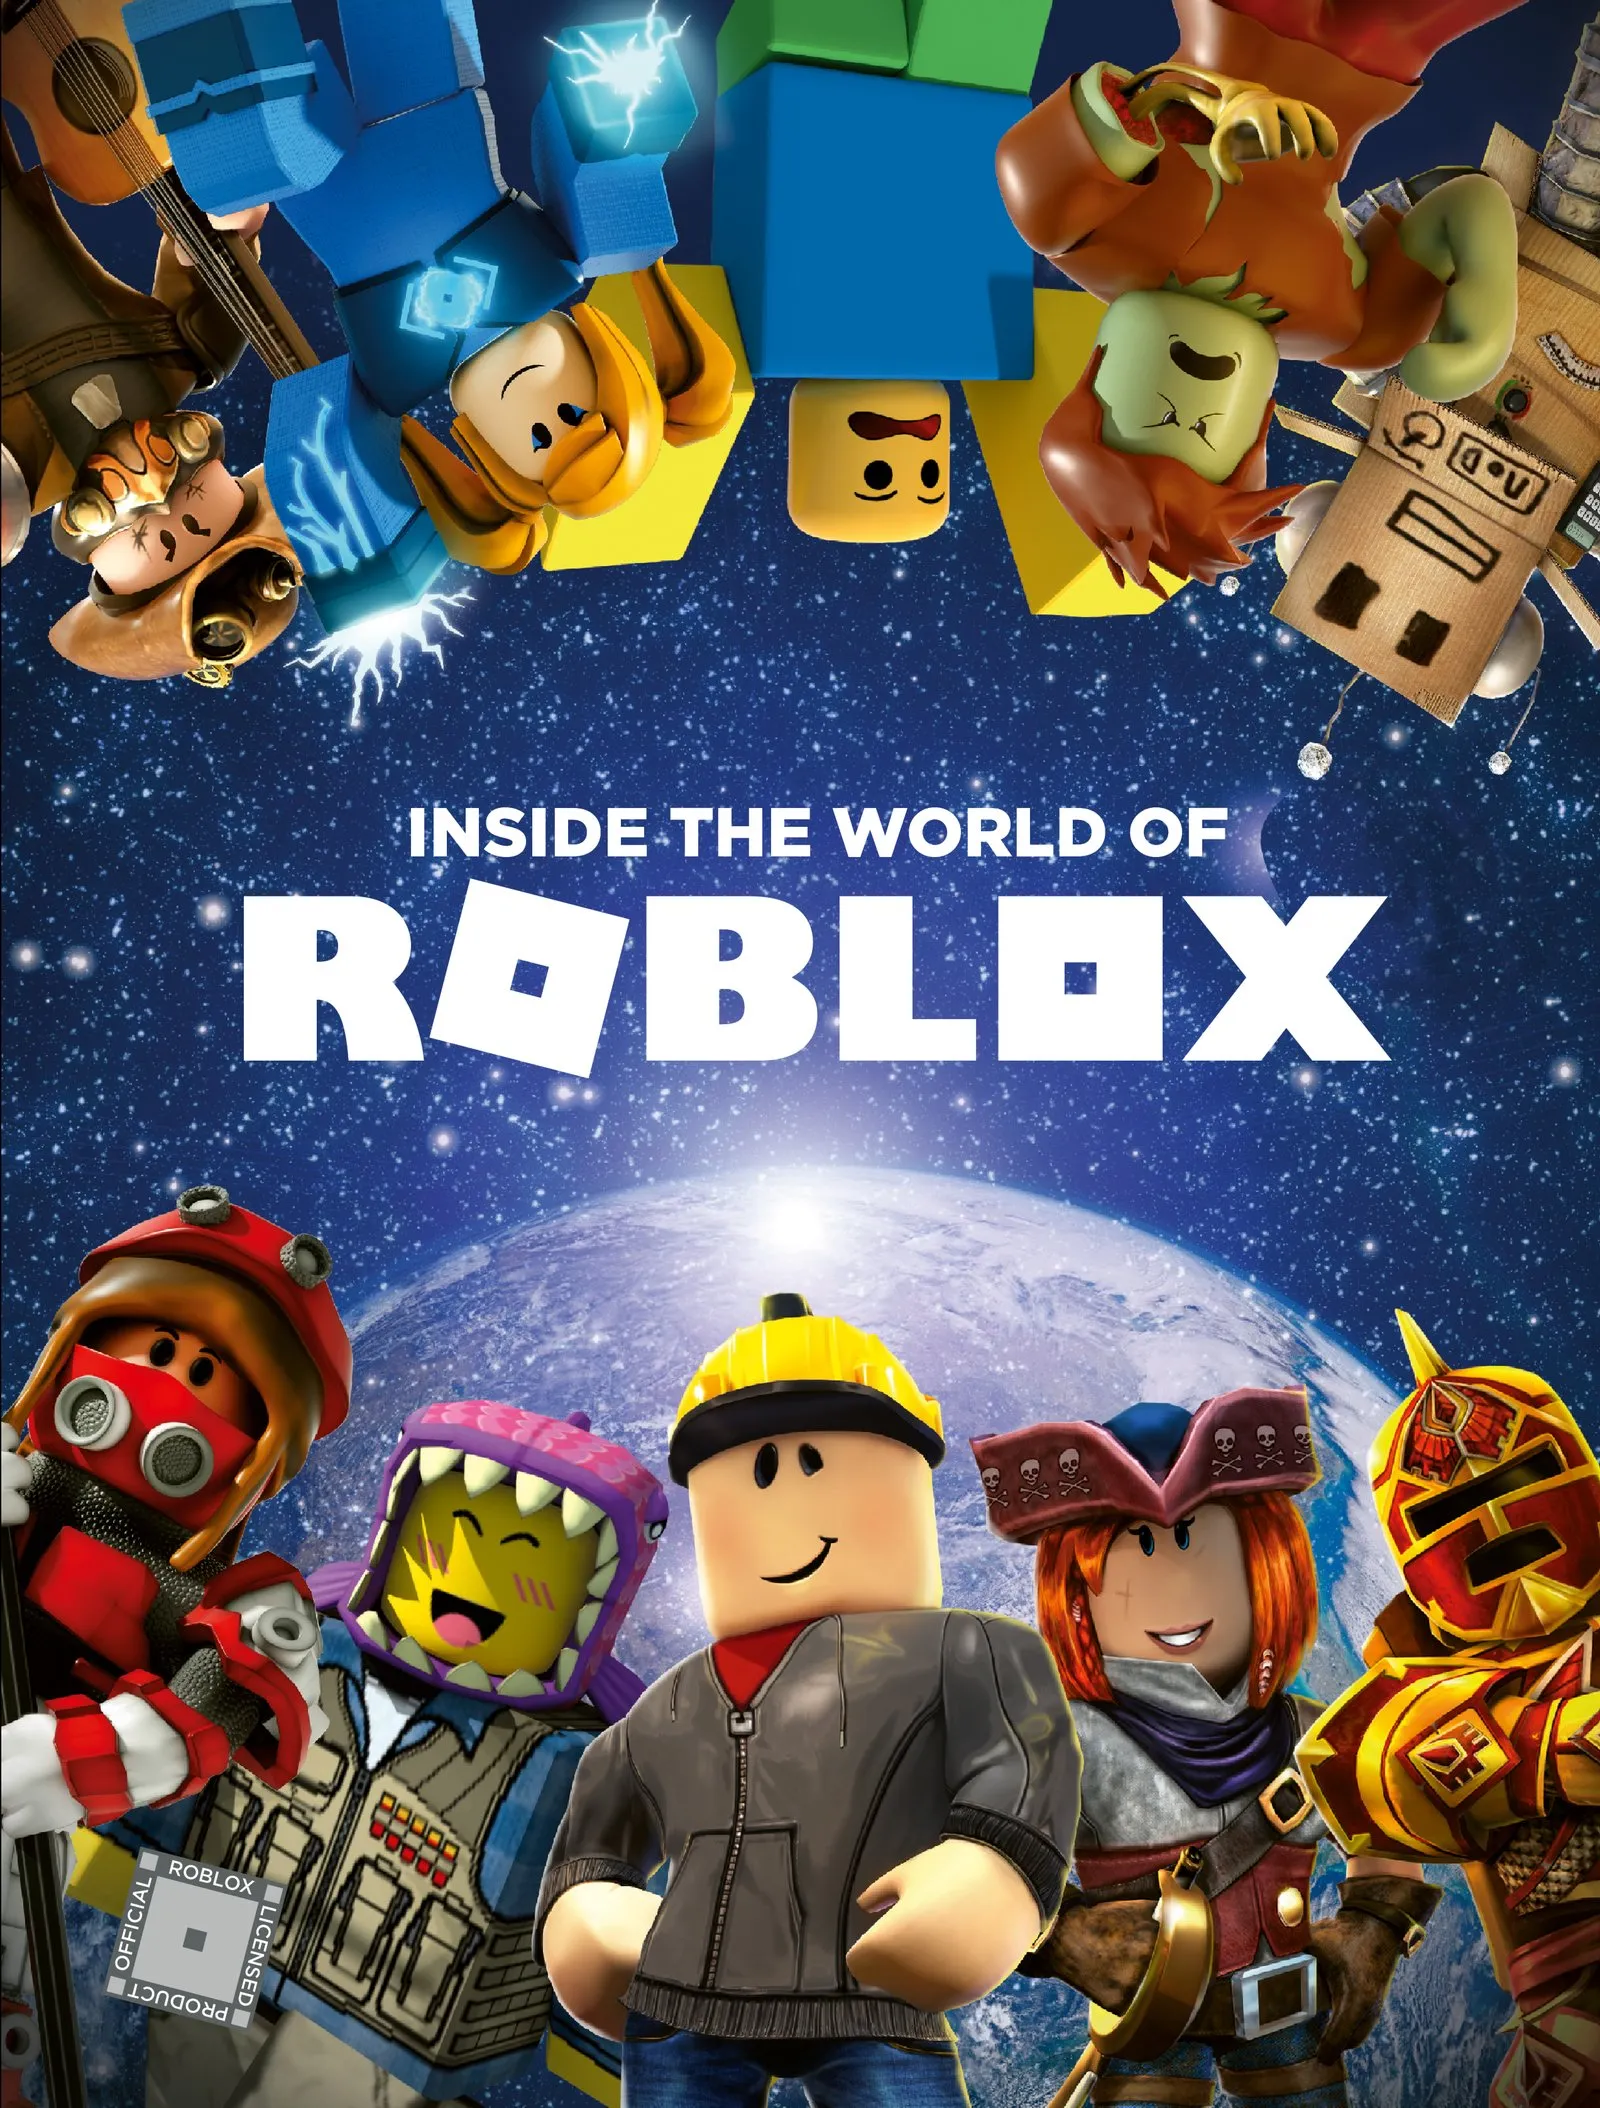 Buy Roblox 12 EUR - 800 Robux Other